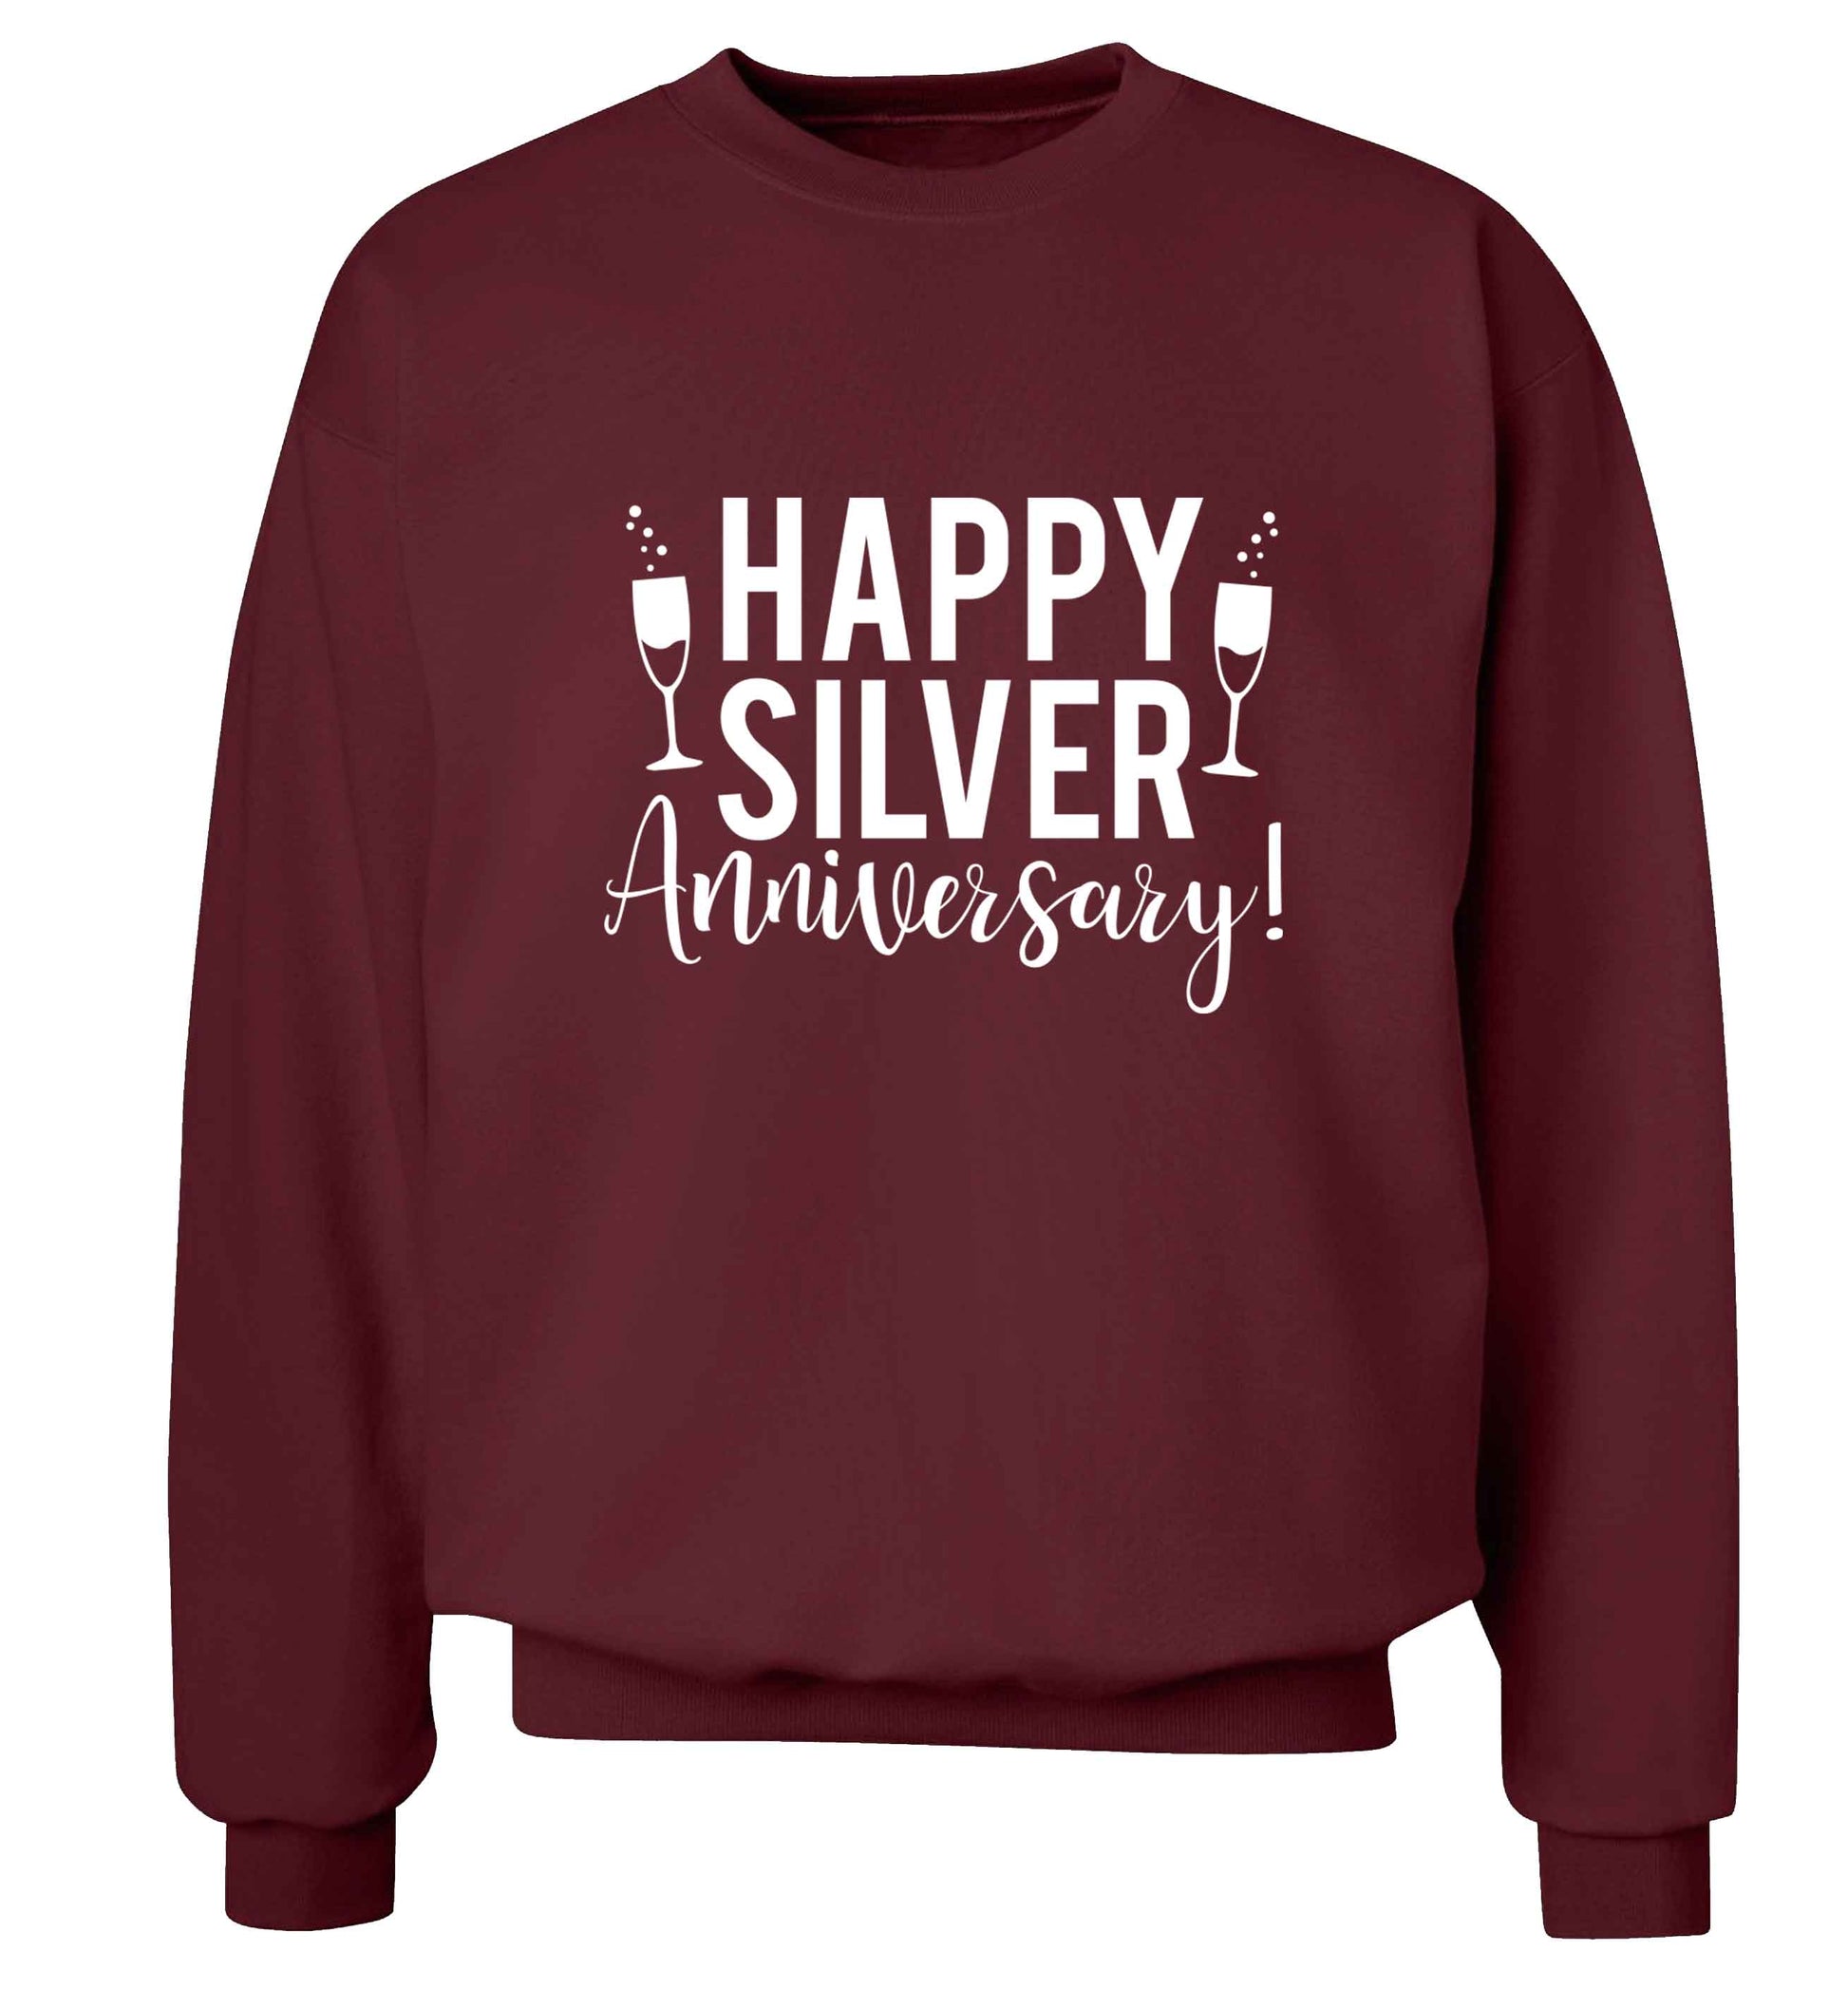 Happy silver anniversary! adult's unisex maroon sweater 2XL